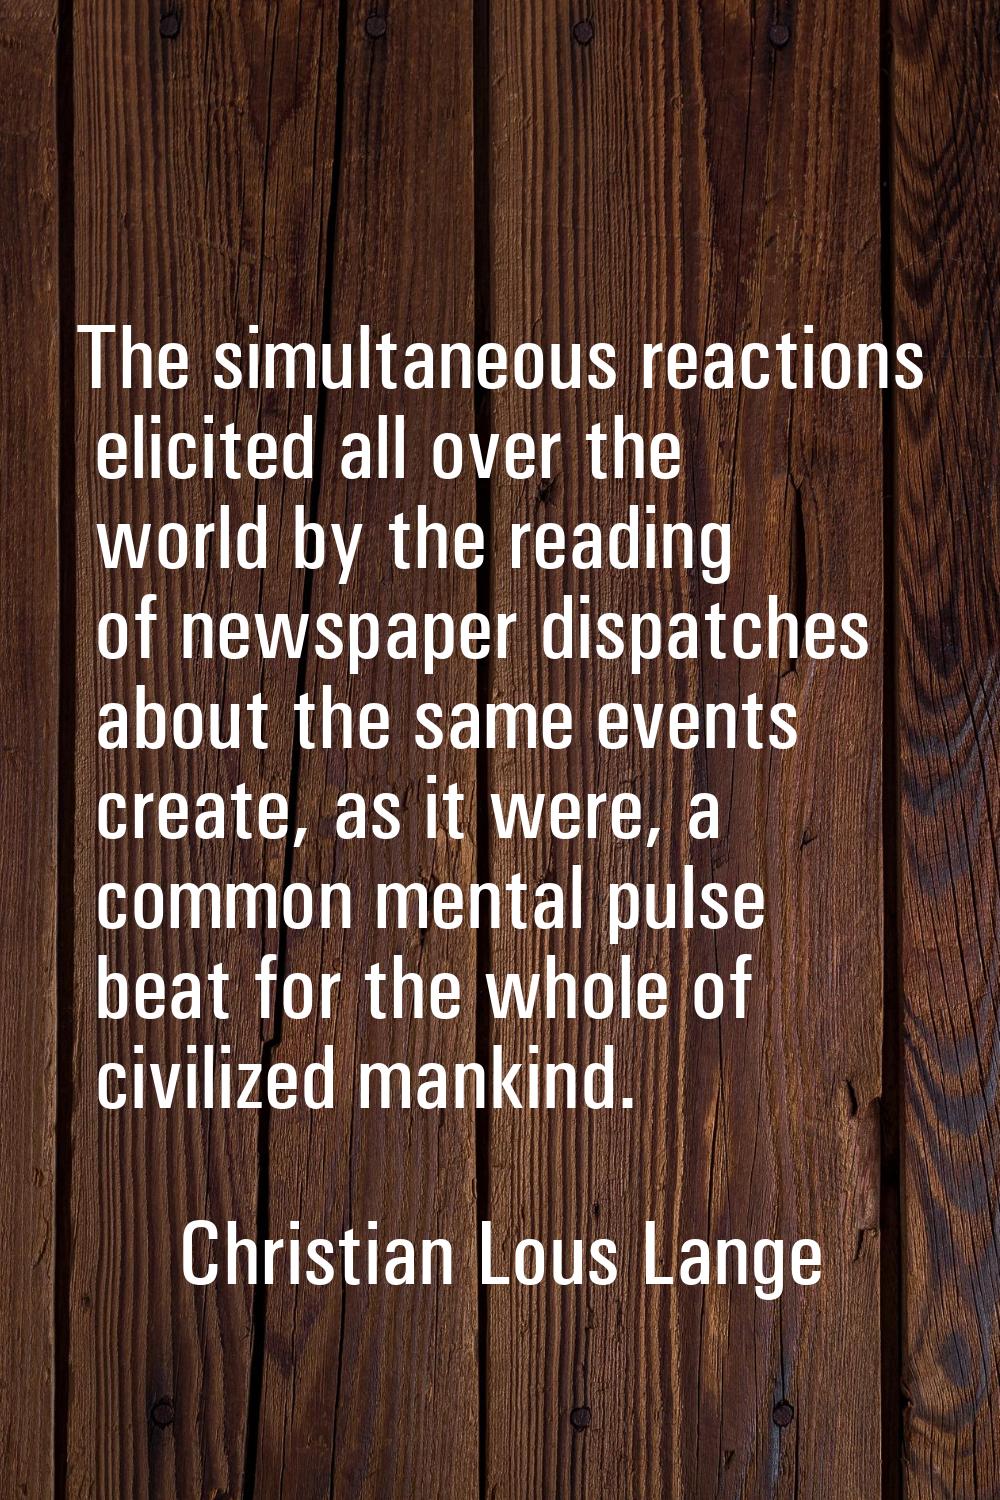 The simultaneous reactions elicited all over the world by the reading of newspaper dispatches about